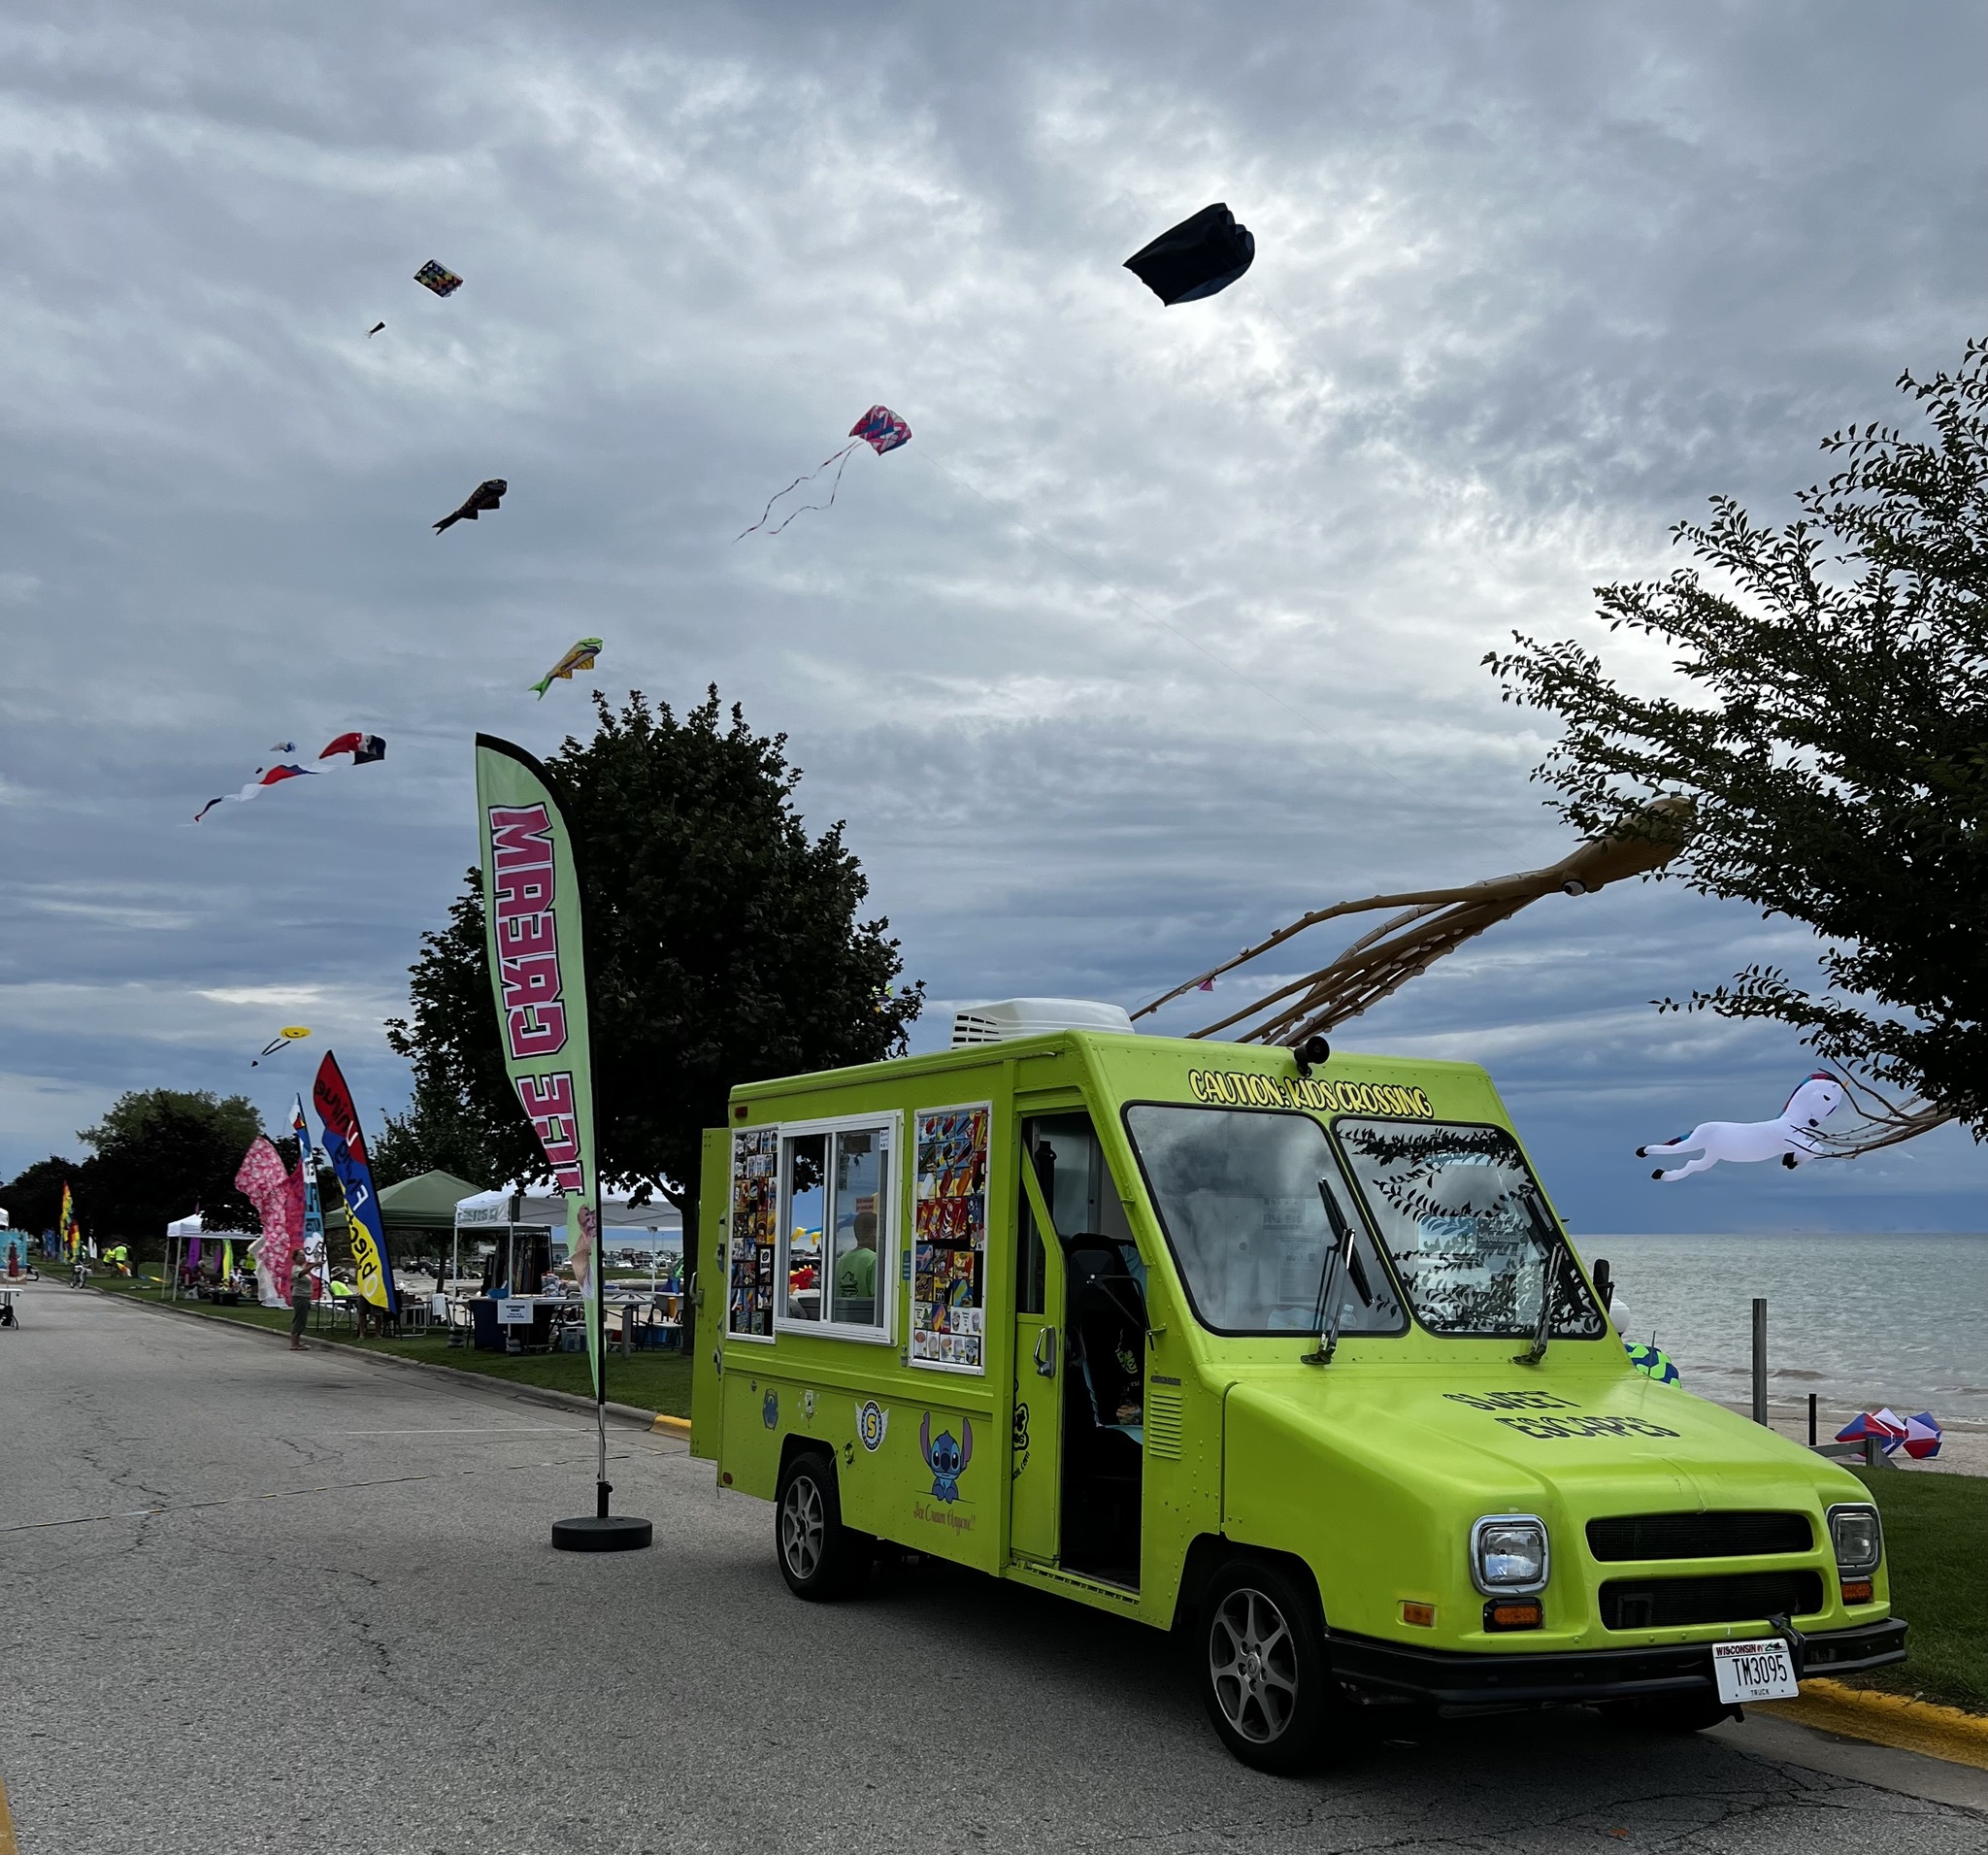 Kite festival with Sweet Escapes